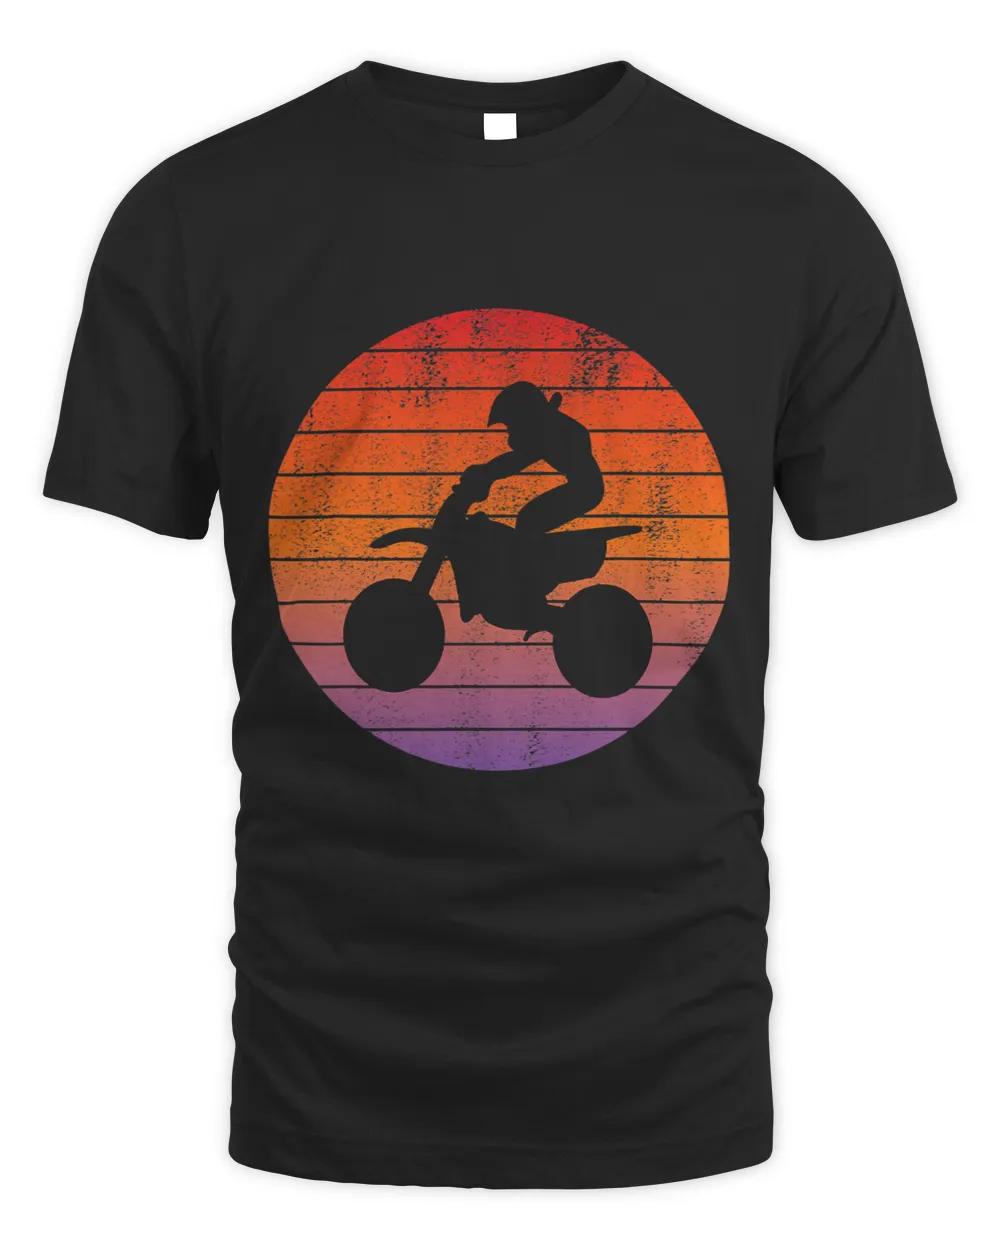 Motorcycle top motorcyclist motorcycle clothing 23